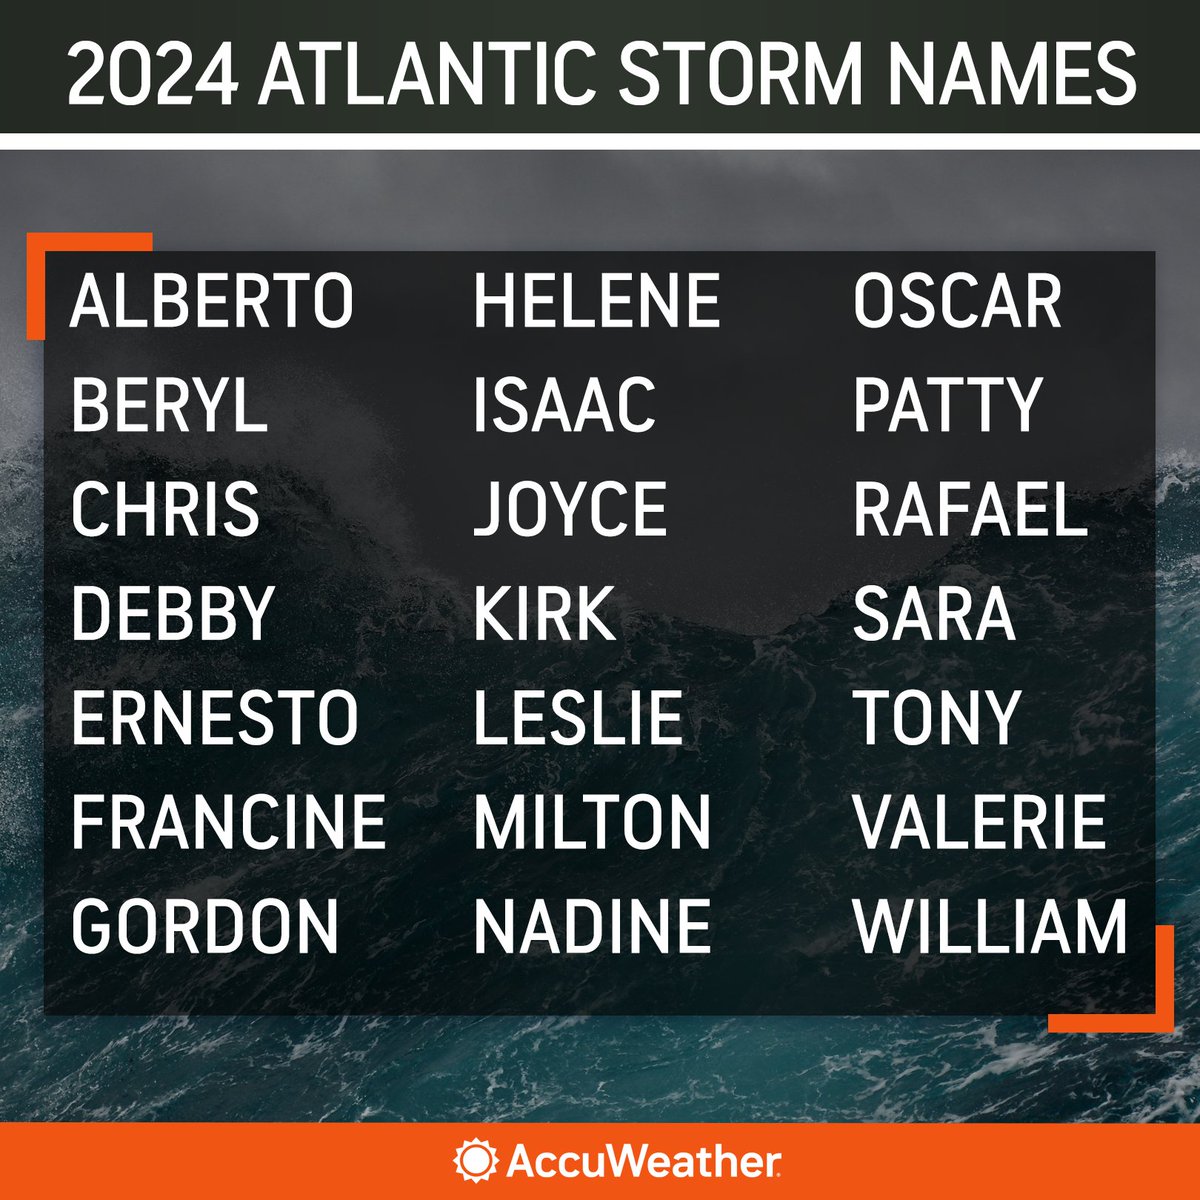 Only 1 month until the start of the 2024 Atlantic hurricane season: Is your name on the list? 🌀 bit.ly/3Wmxcp6